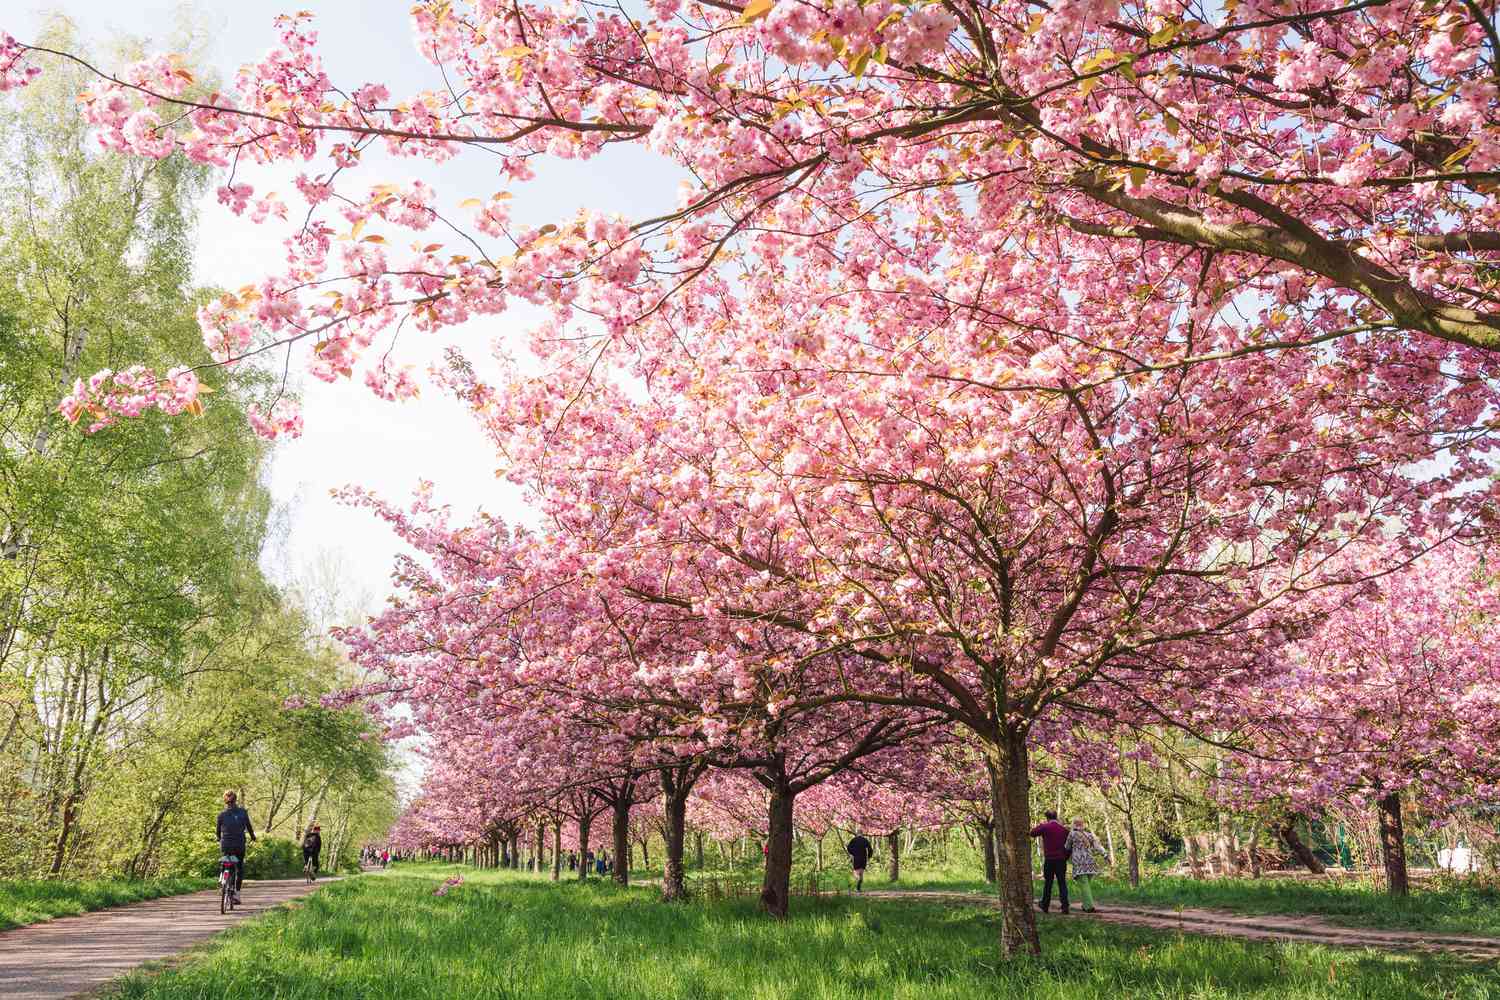 How Much Are Cherry Blossom Trees